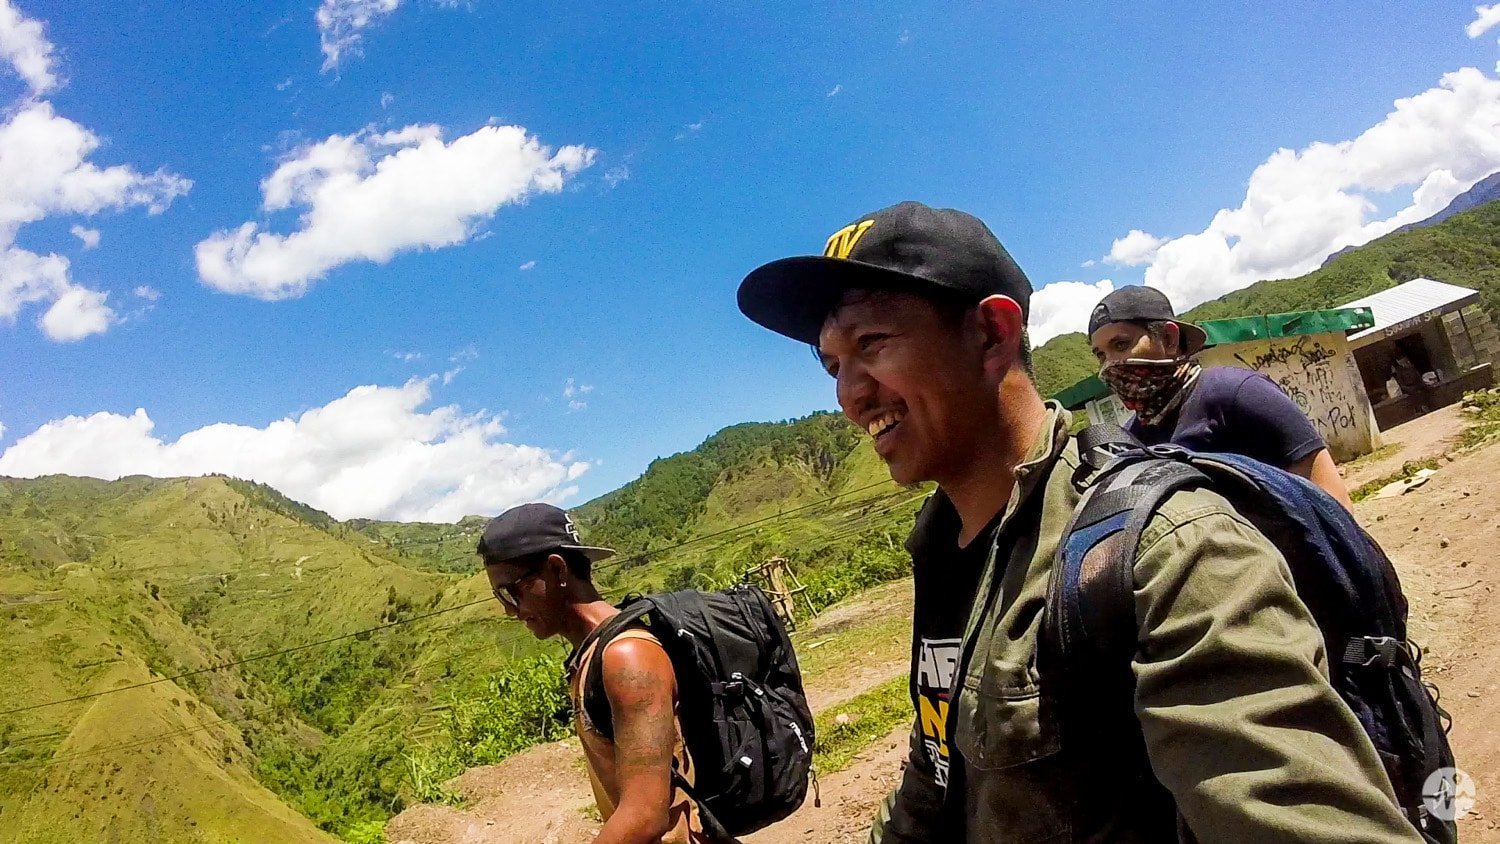 Hiking from turning point going to Buscalan Village